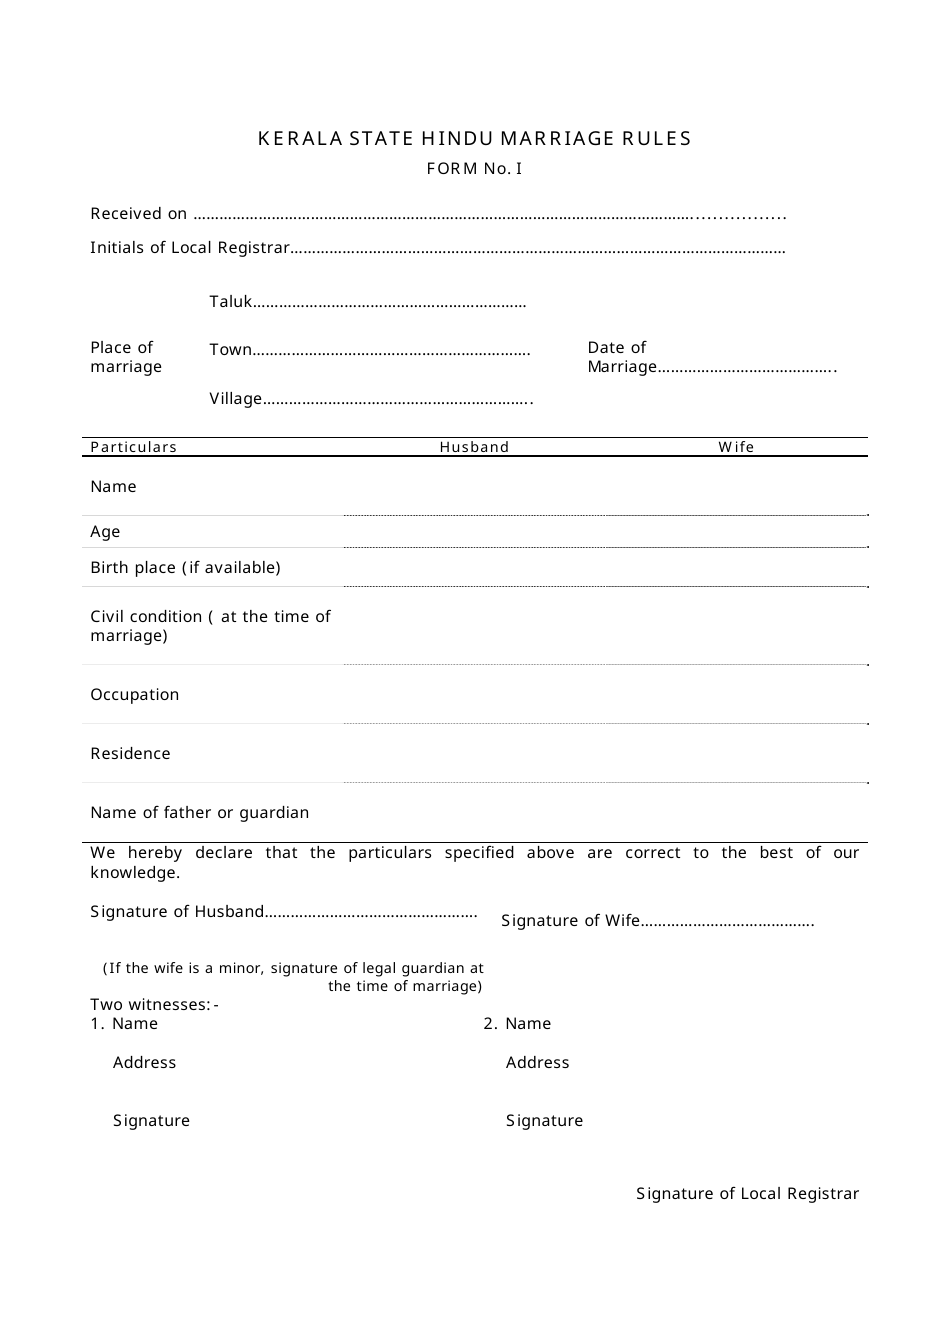 Form 1 Application for Registration of Hindu Marriage - Kerala, India, Page 1